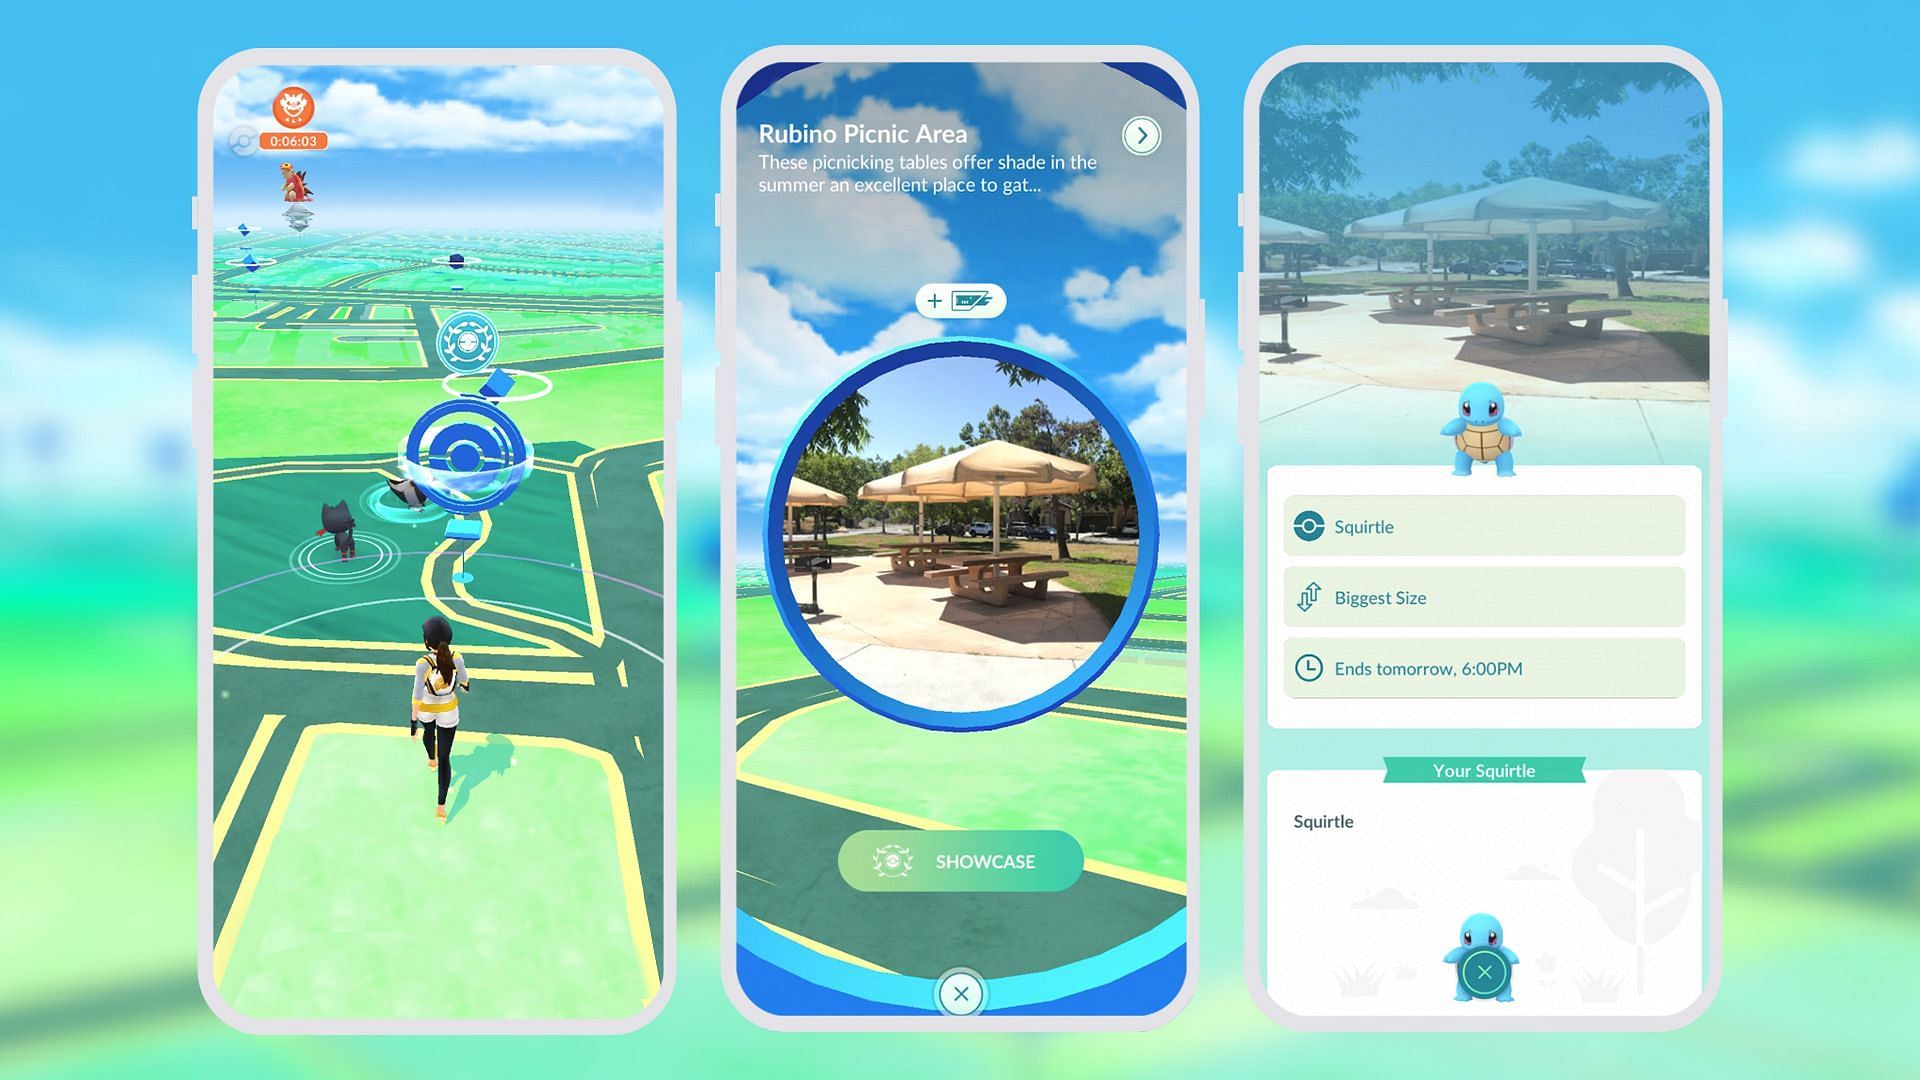 Pokestop Showcases only tend to appear during events, rather than constantly being active (Image via Niantic)